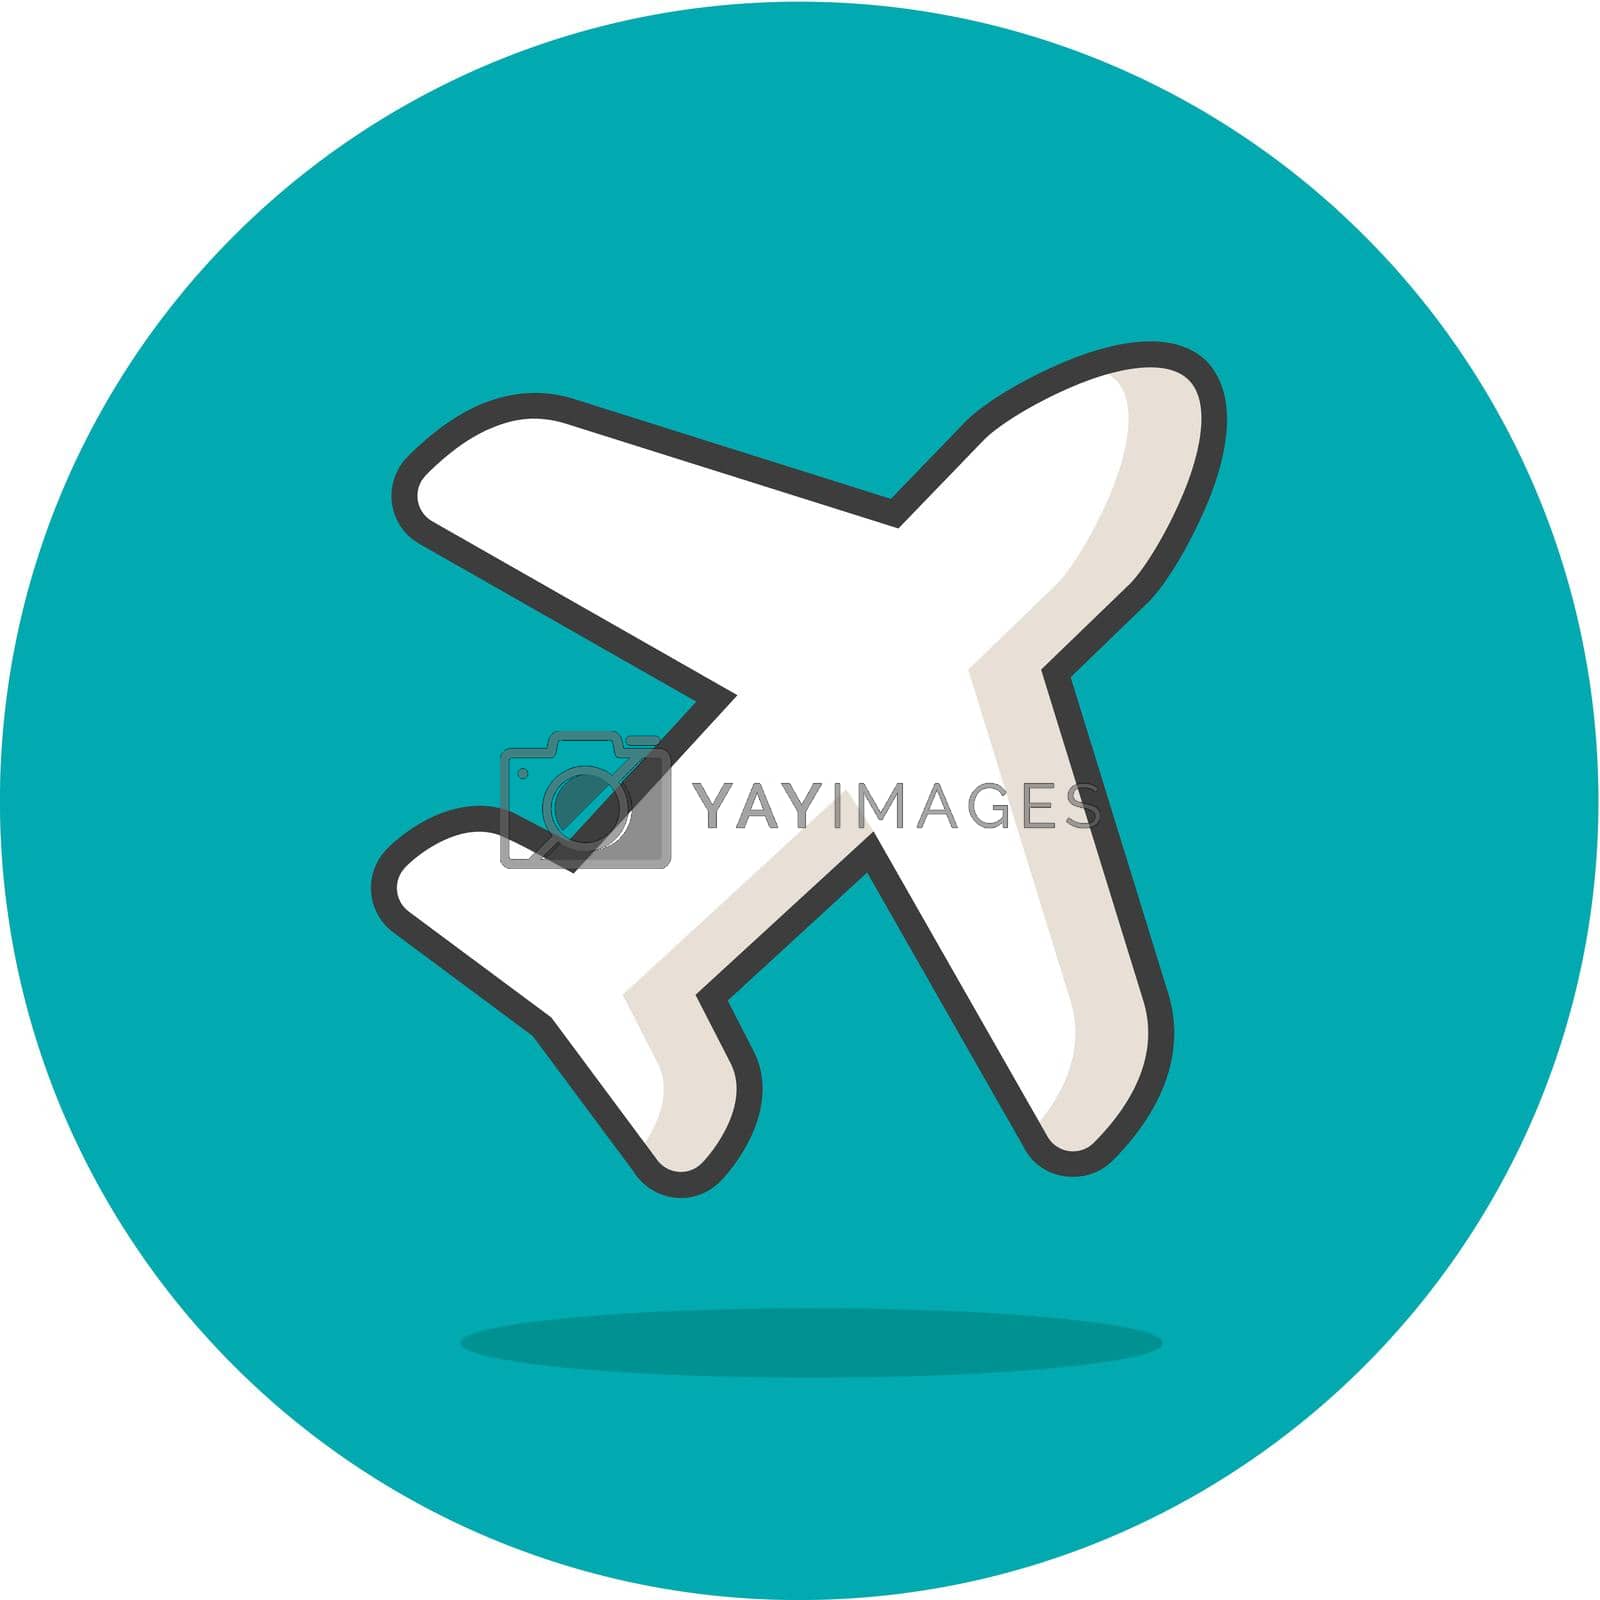 Royalty free image of Airplane vector icon by nosik